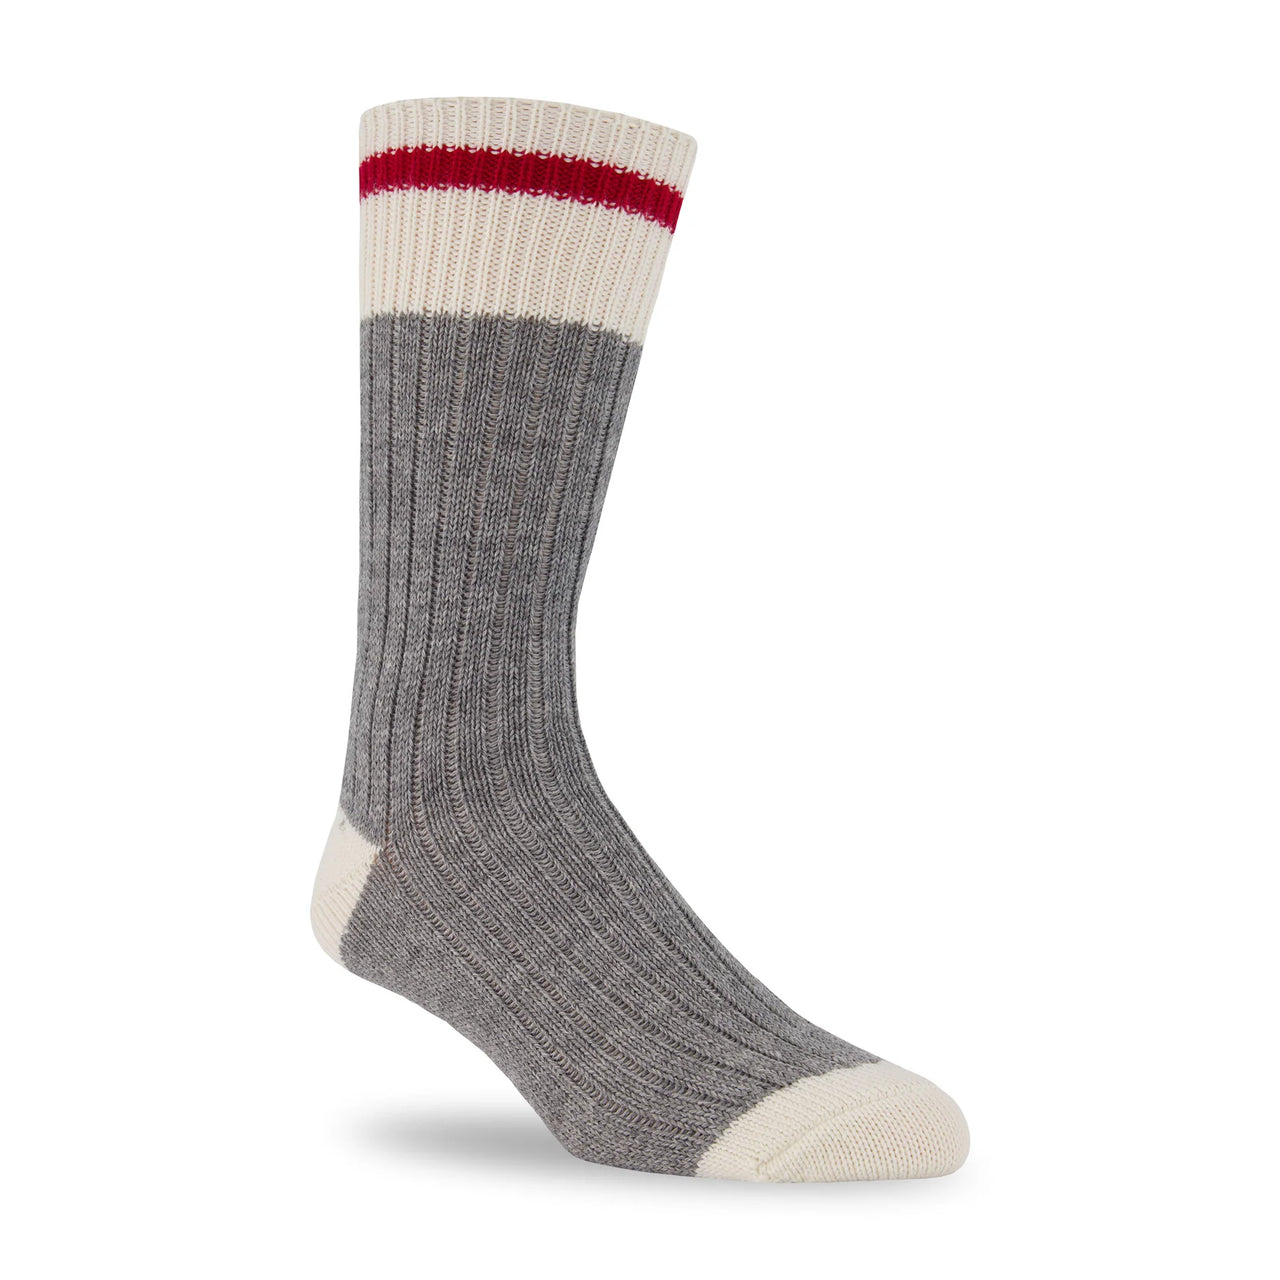 The Great Canadian Sox Ladie's Wool/Acrylic Work Sock